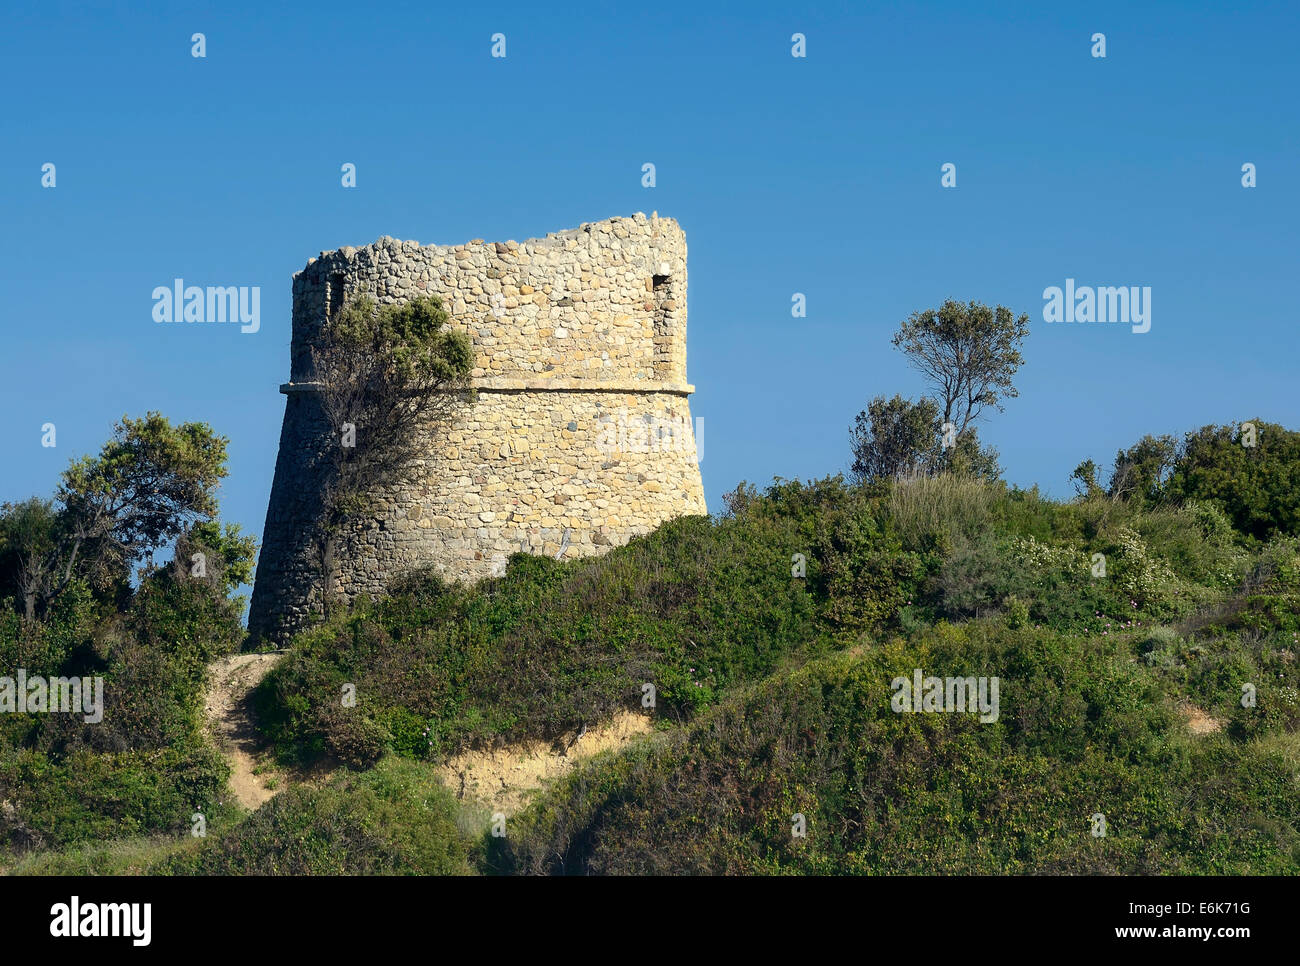 Age, dilapidated Genoese tower, round tower, near Aléria, Corsica, France Stock Photo